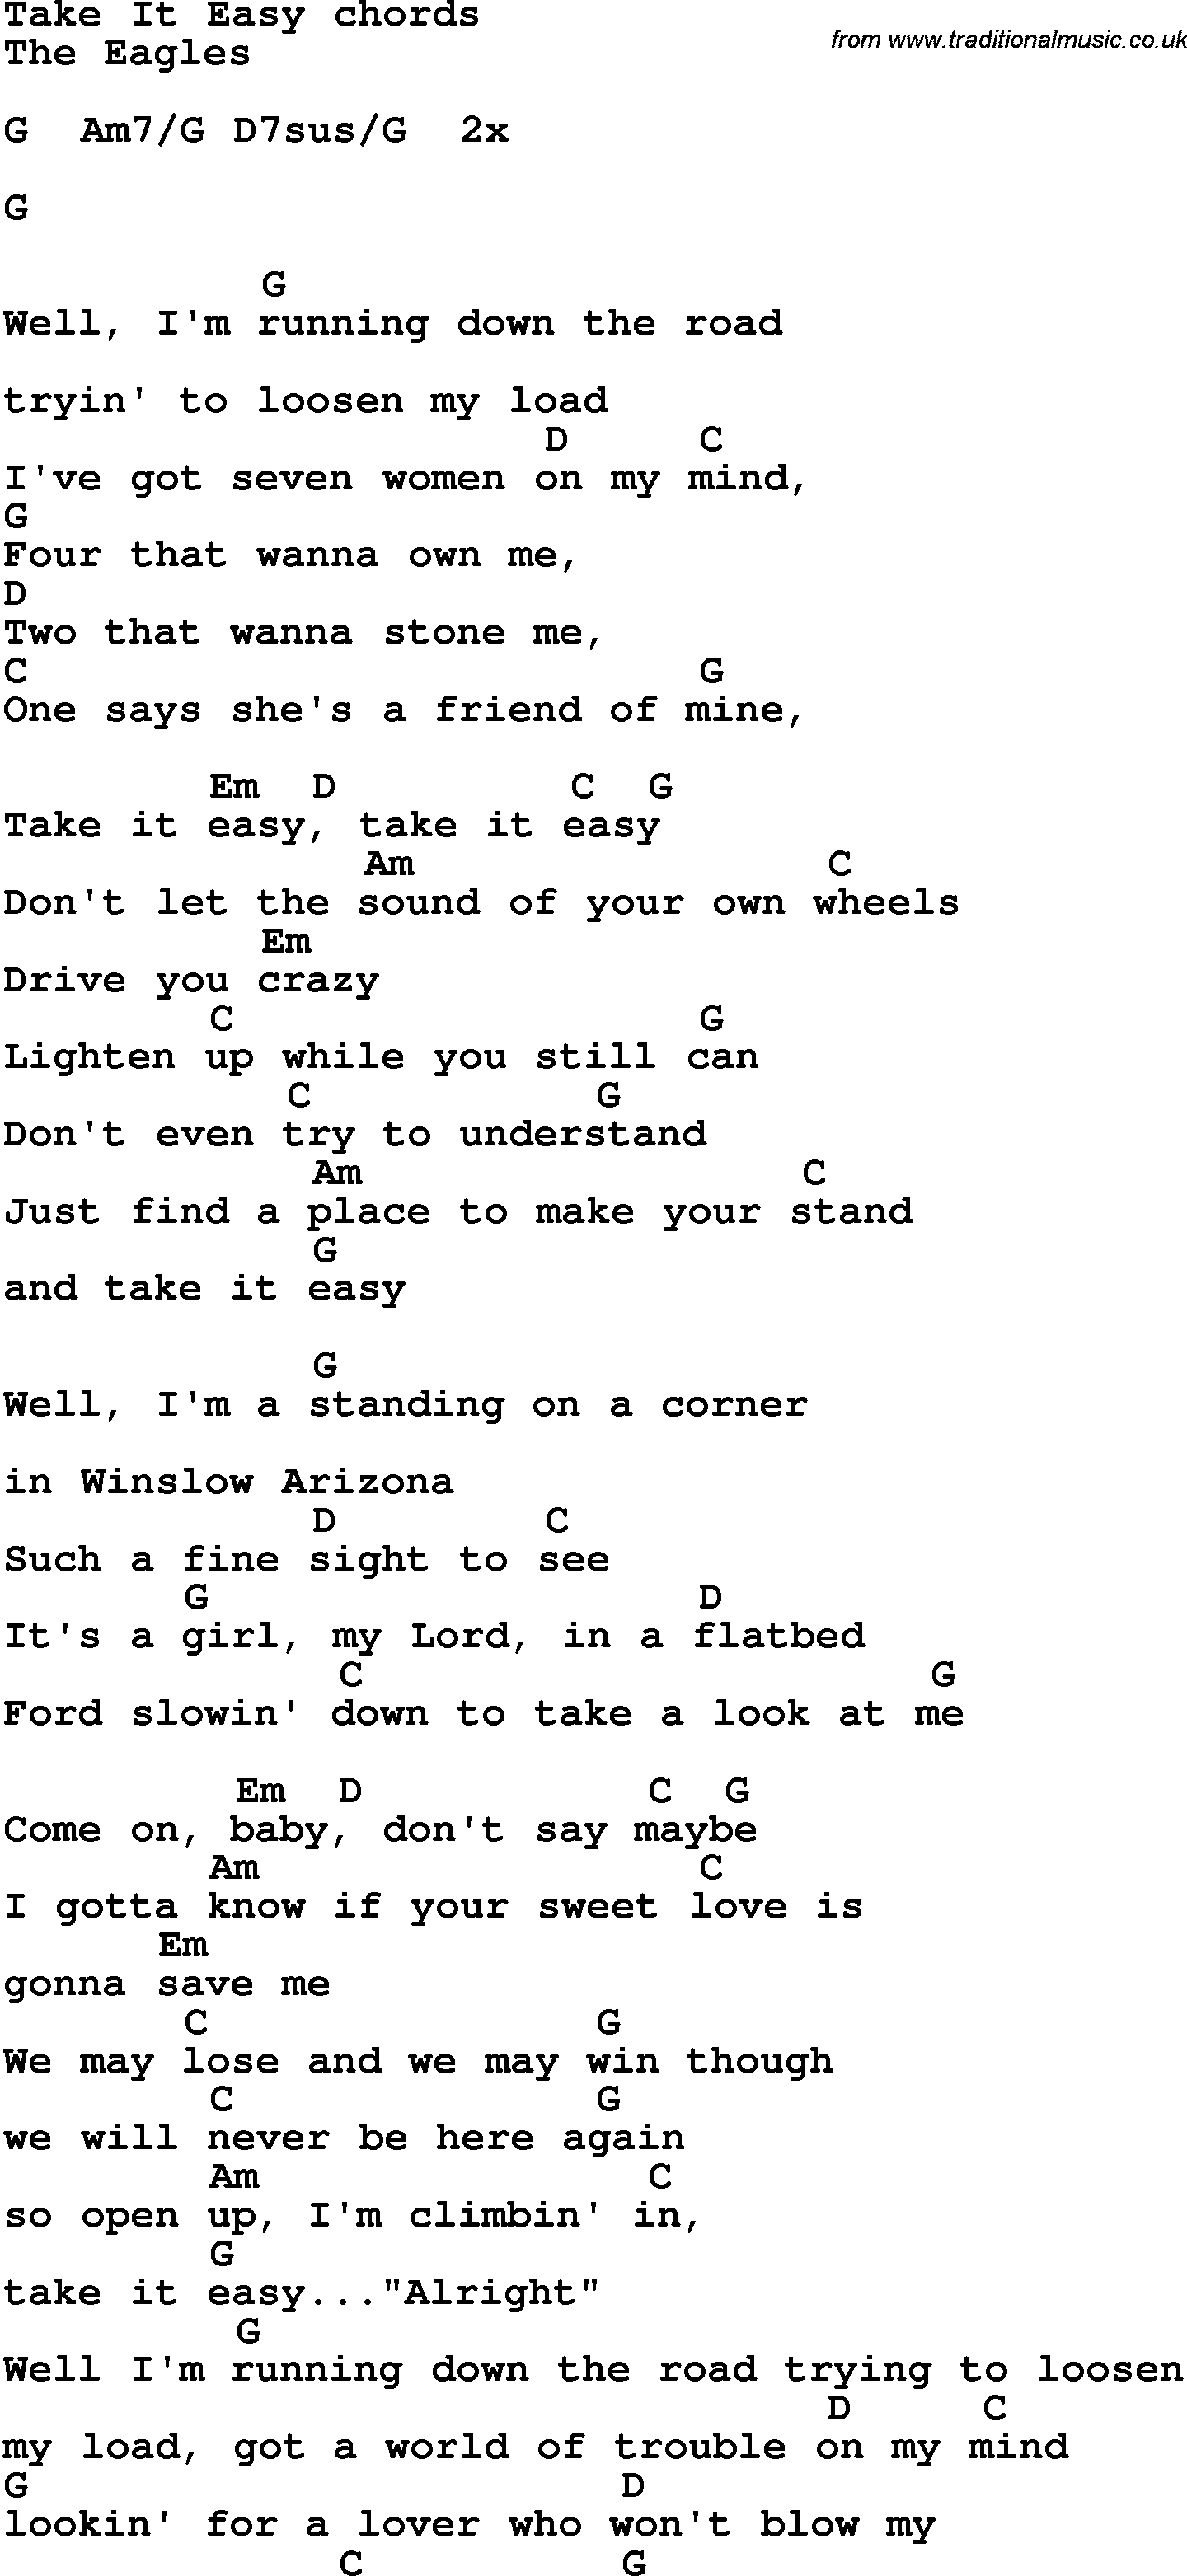 Easy Guitar Chords Song Lyrics With Guitar Chords For Take It Easy The Eagles